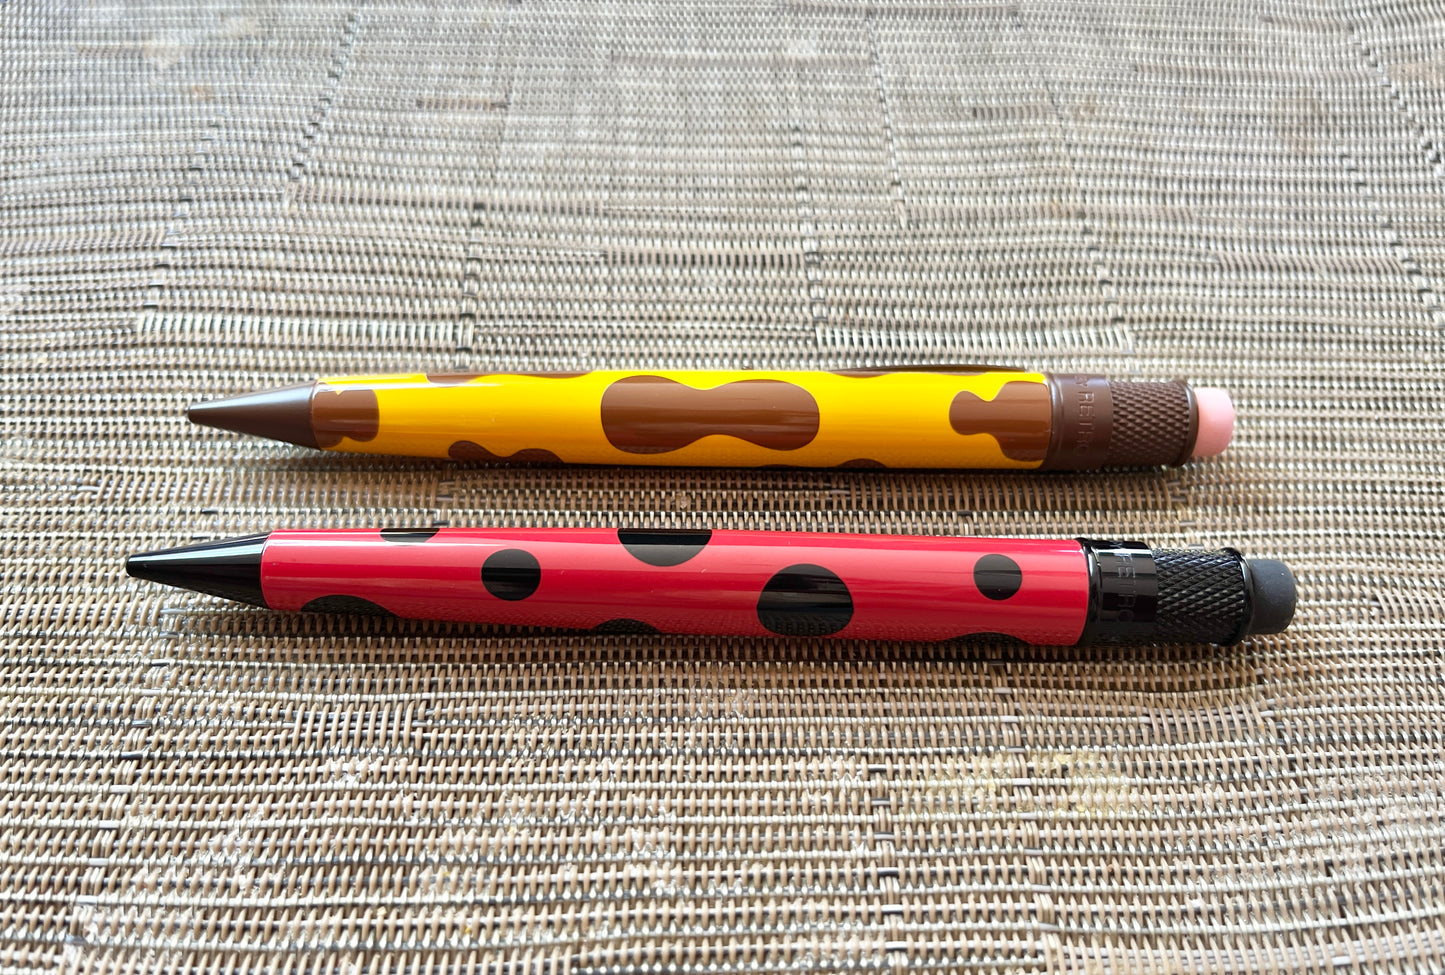 Retro 51 Tornado Pencil's - Goldy and Lucky MATCHING NUMBERS